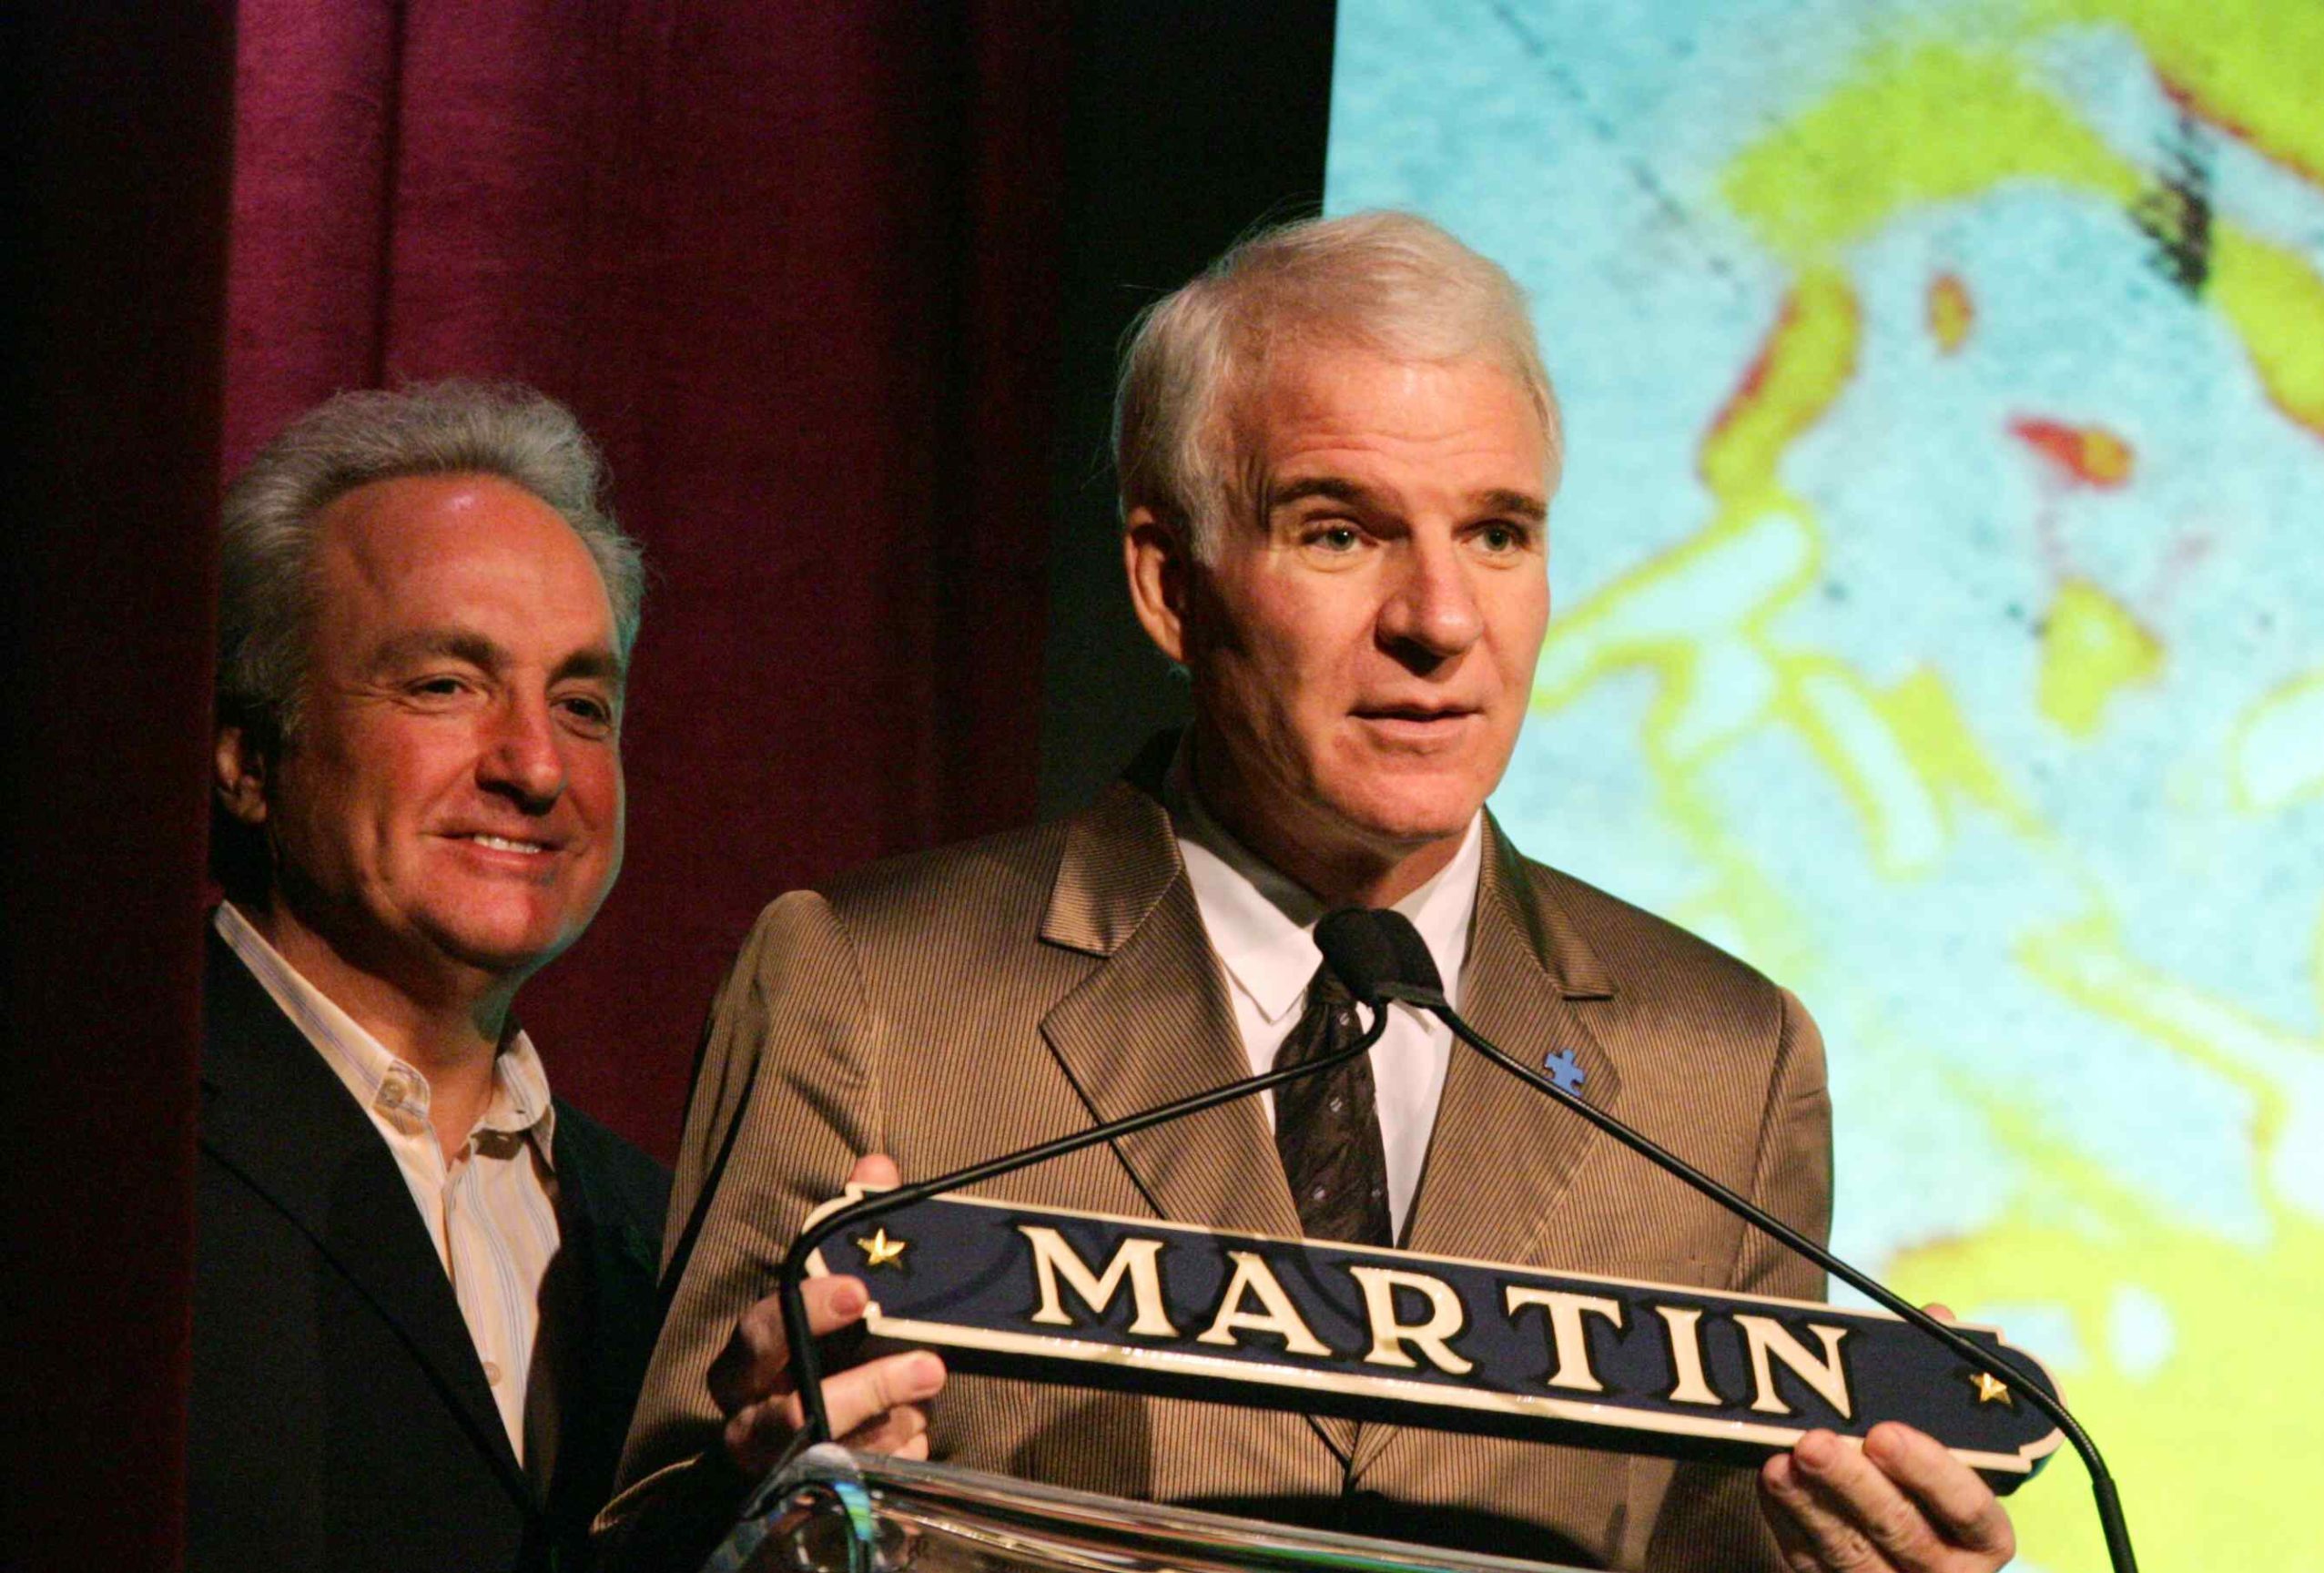 Lorne Michaels and Steve Martin at the NBC Universal Screenwriters Tribute to Steve Martin at the Siasconset Casino during the 10th Annual Nantucket Film Festival on June 18, 2005.


Nantucket, Massachusetts 

Photo © Matt Baron/BEImages